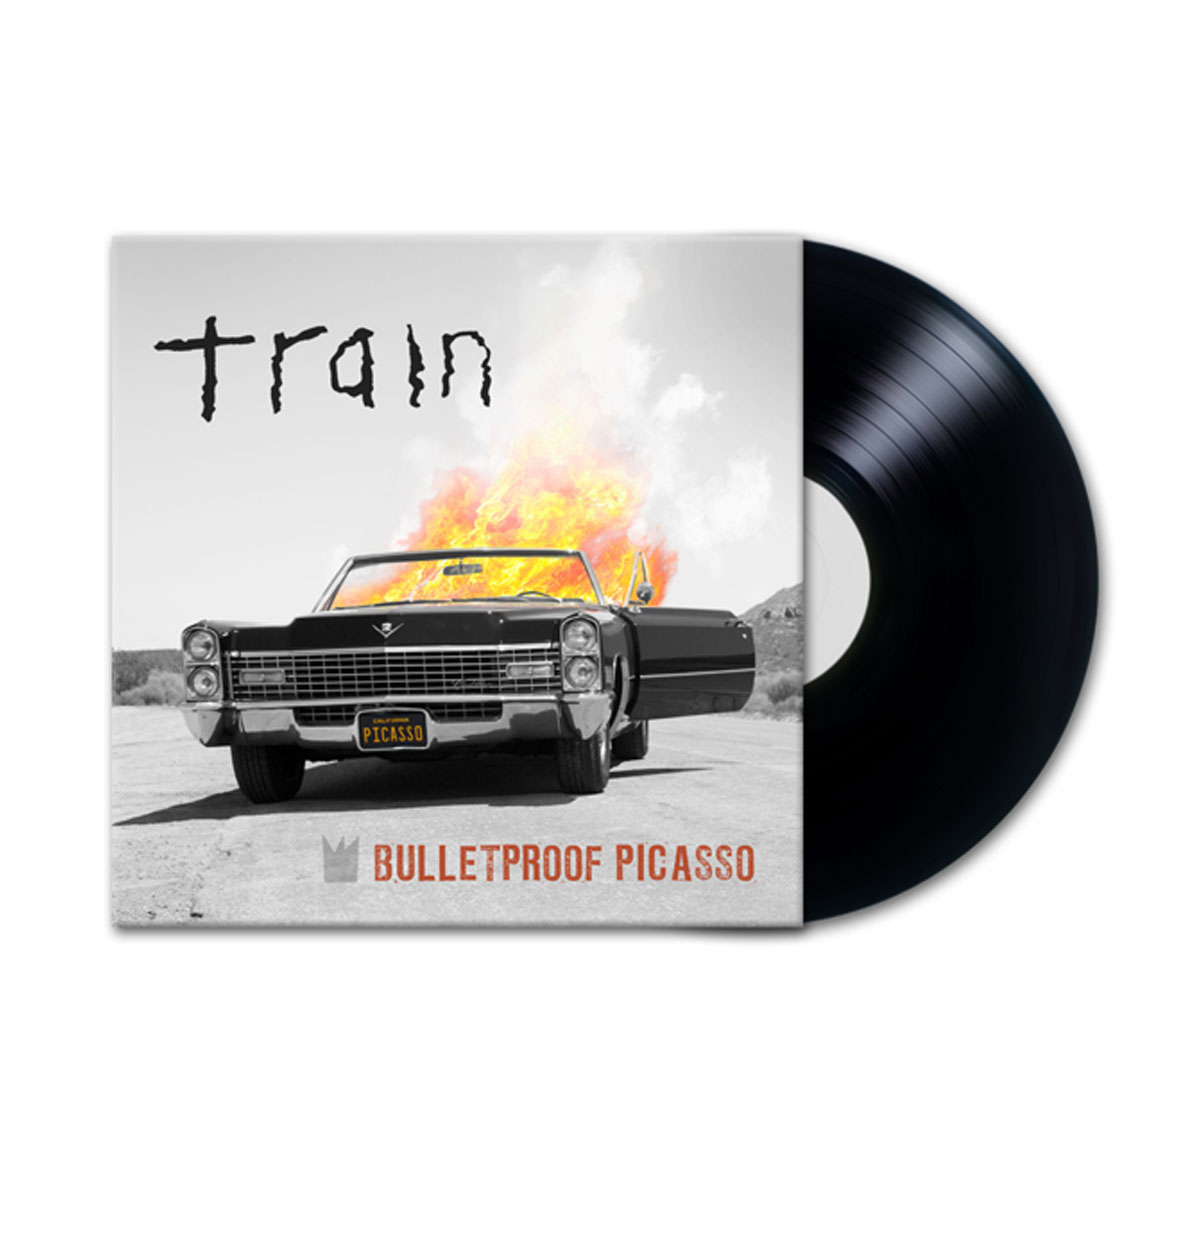 Train - Bulletproof Picasso LP and CD